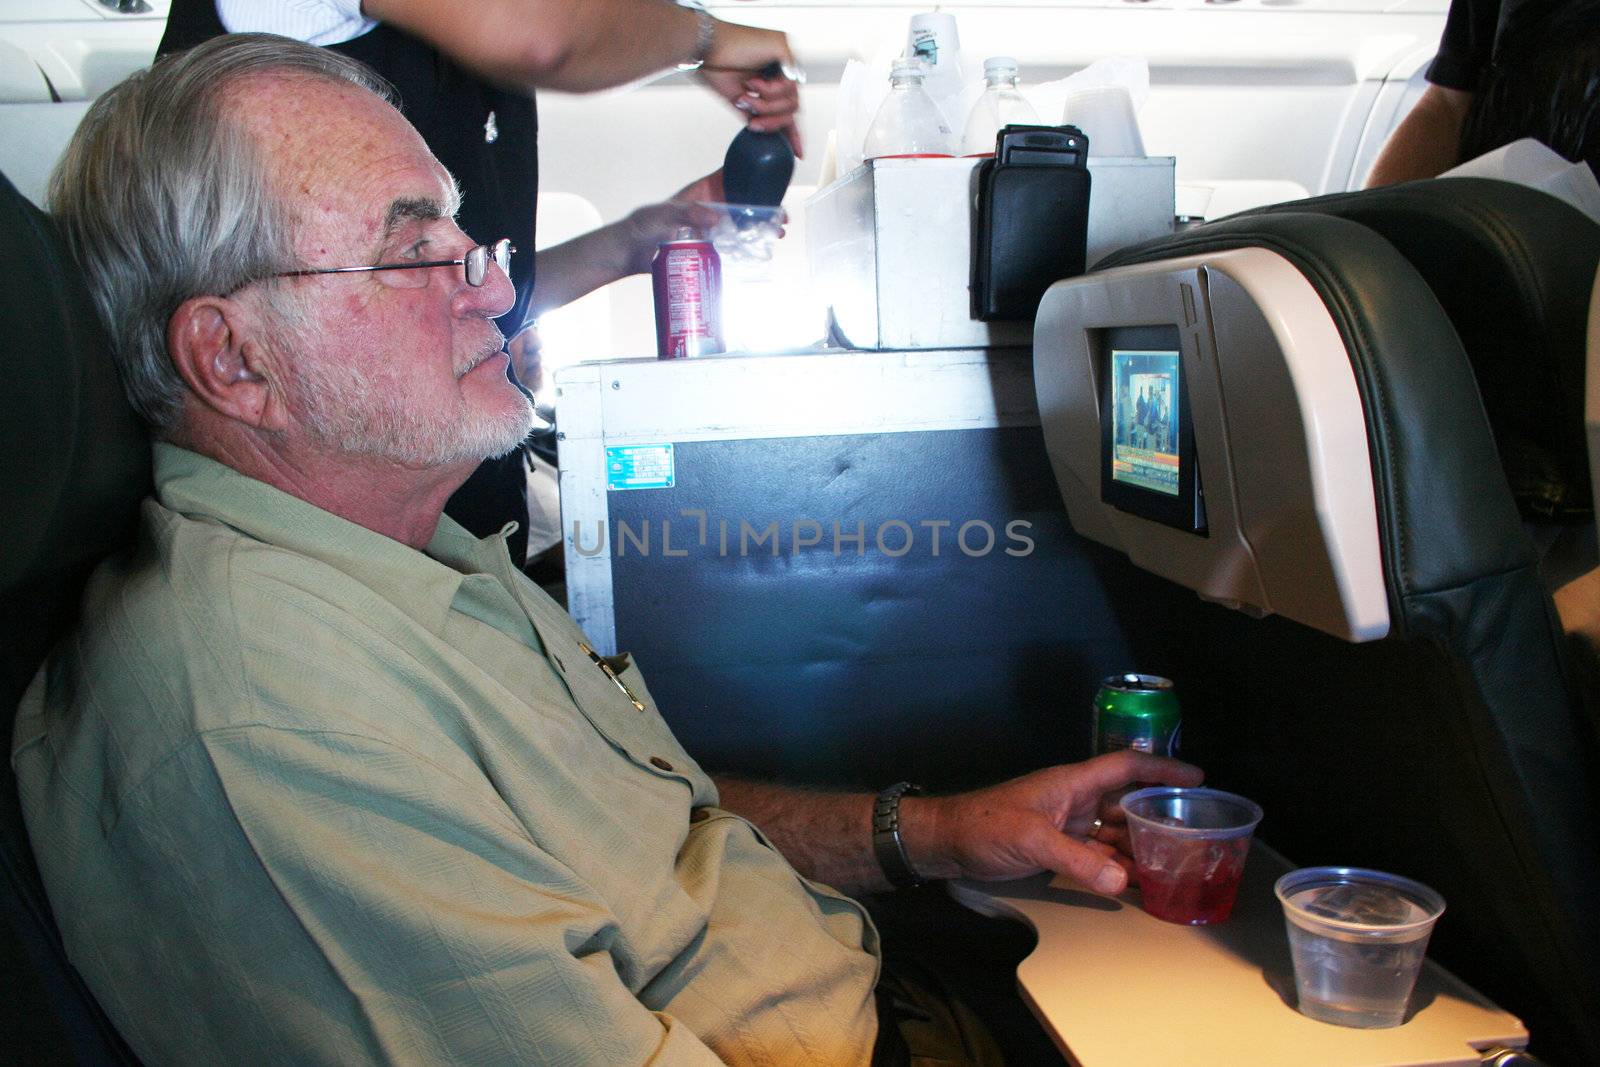 Man on airplane with stuartess serving drinks